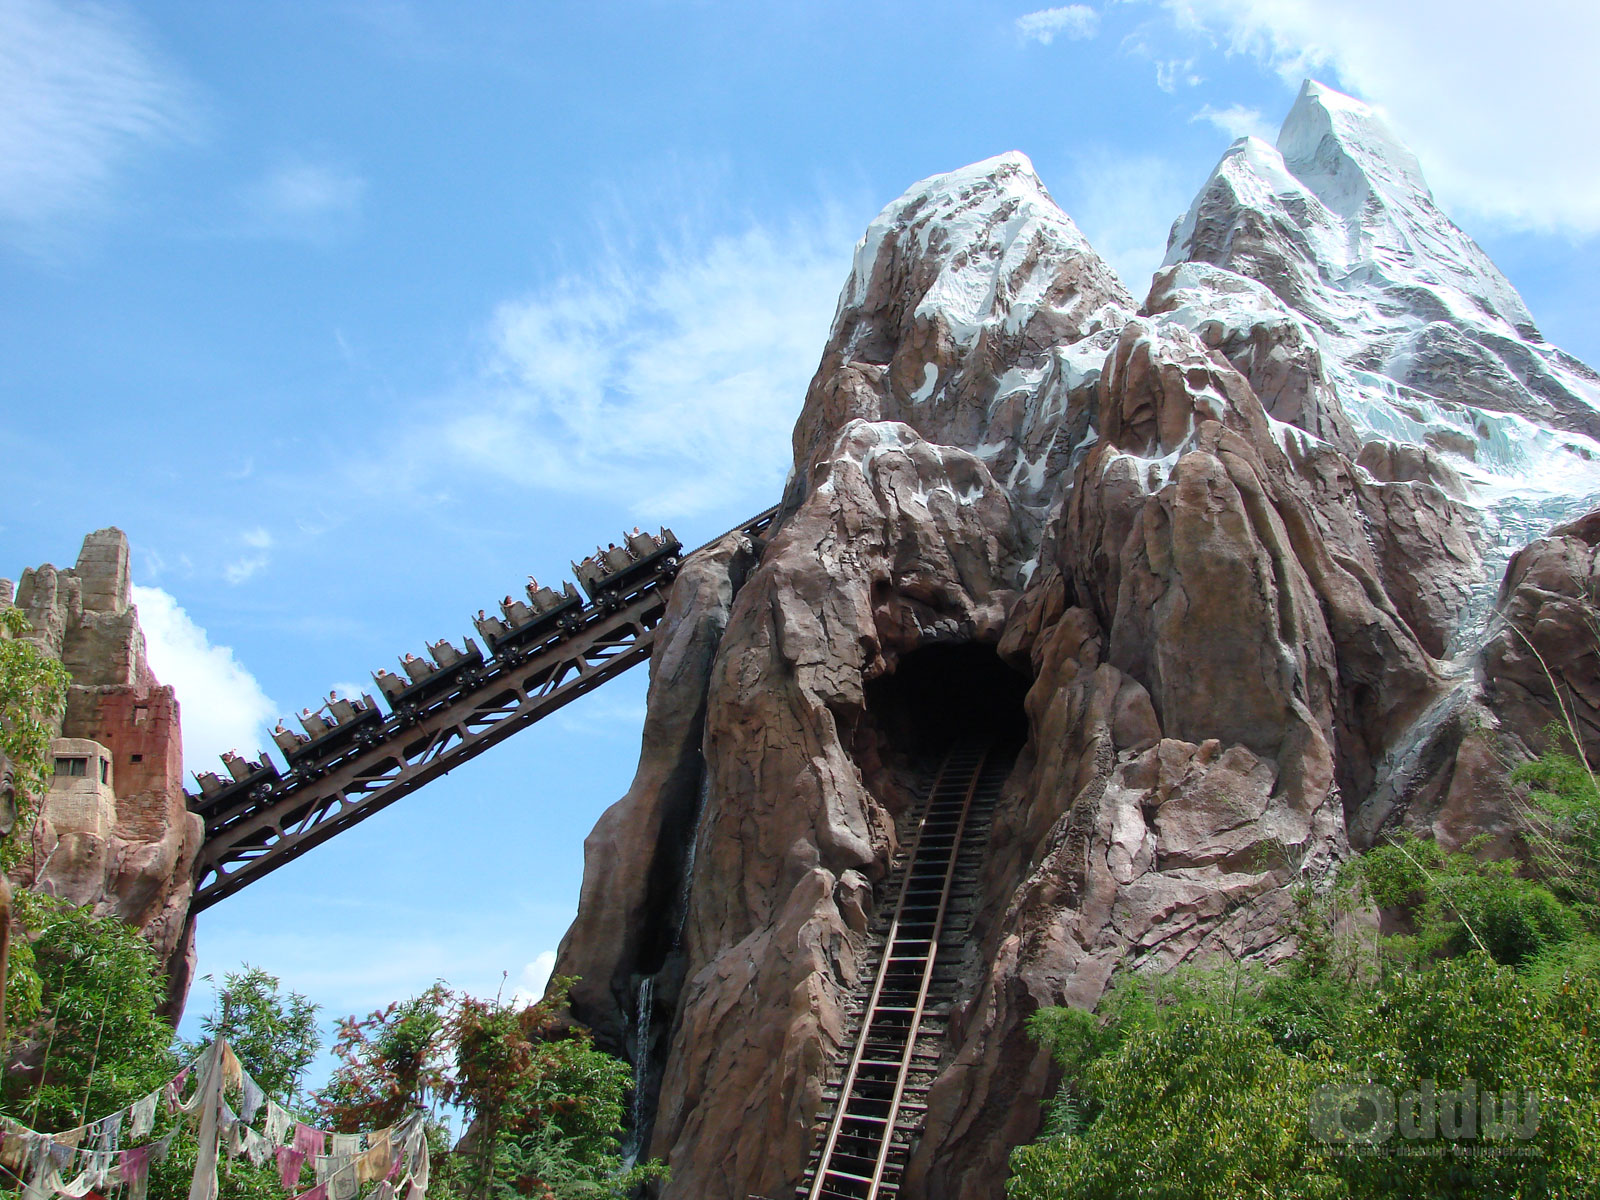 expedition everest condition